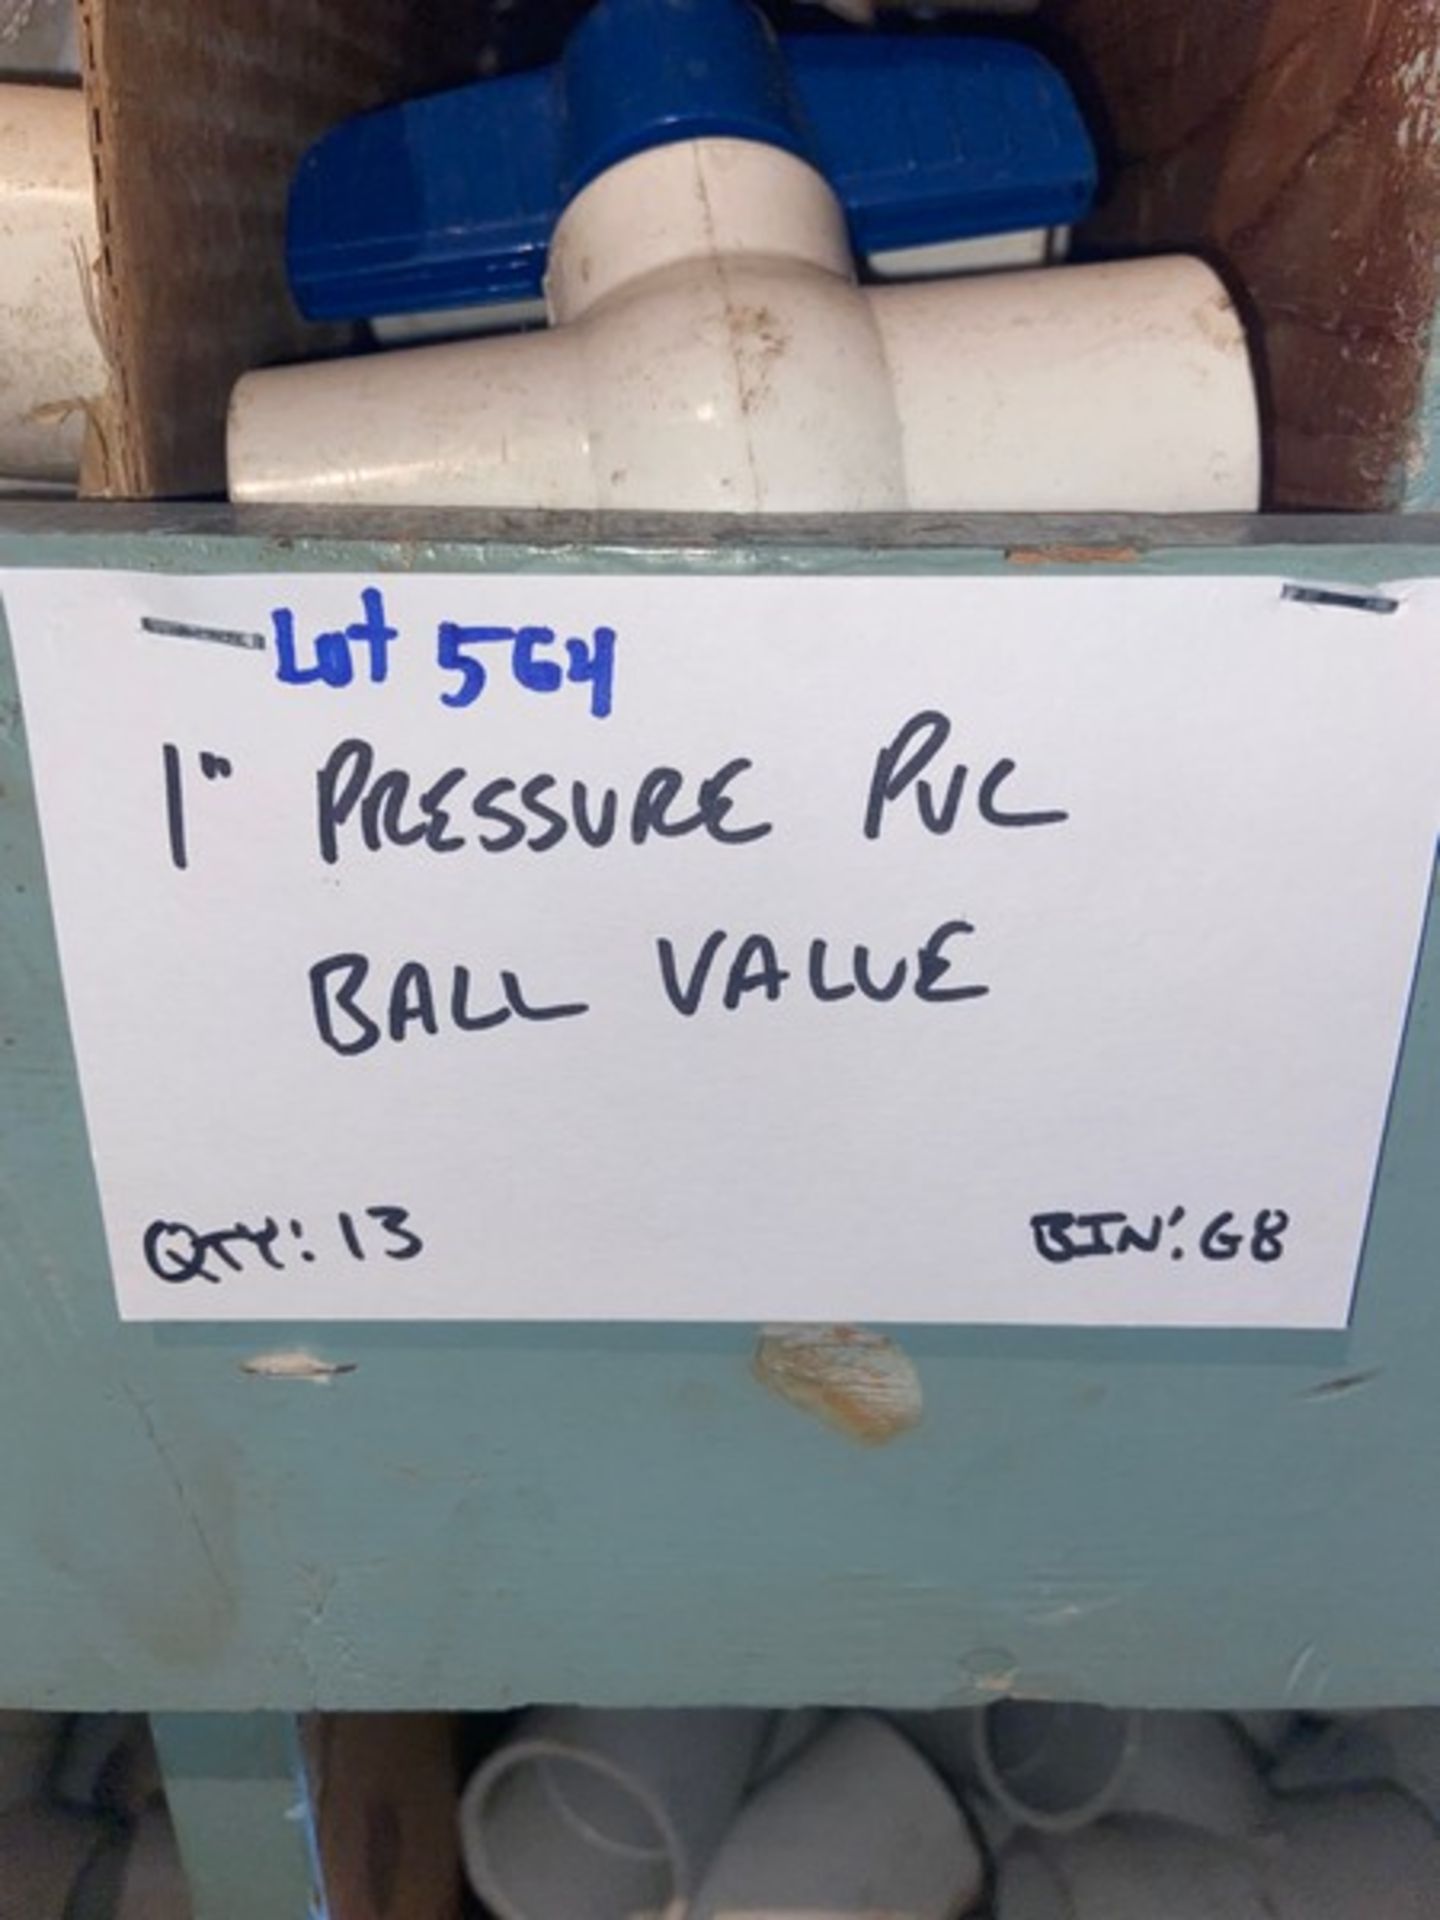 (13) 1” Pressure PVC Ball Valve (Bin:G8) (LOCATED IN MONROEVILLE, PA) - Image 3 of 3